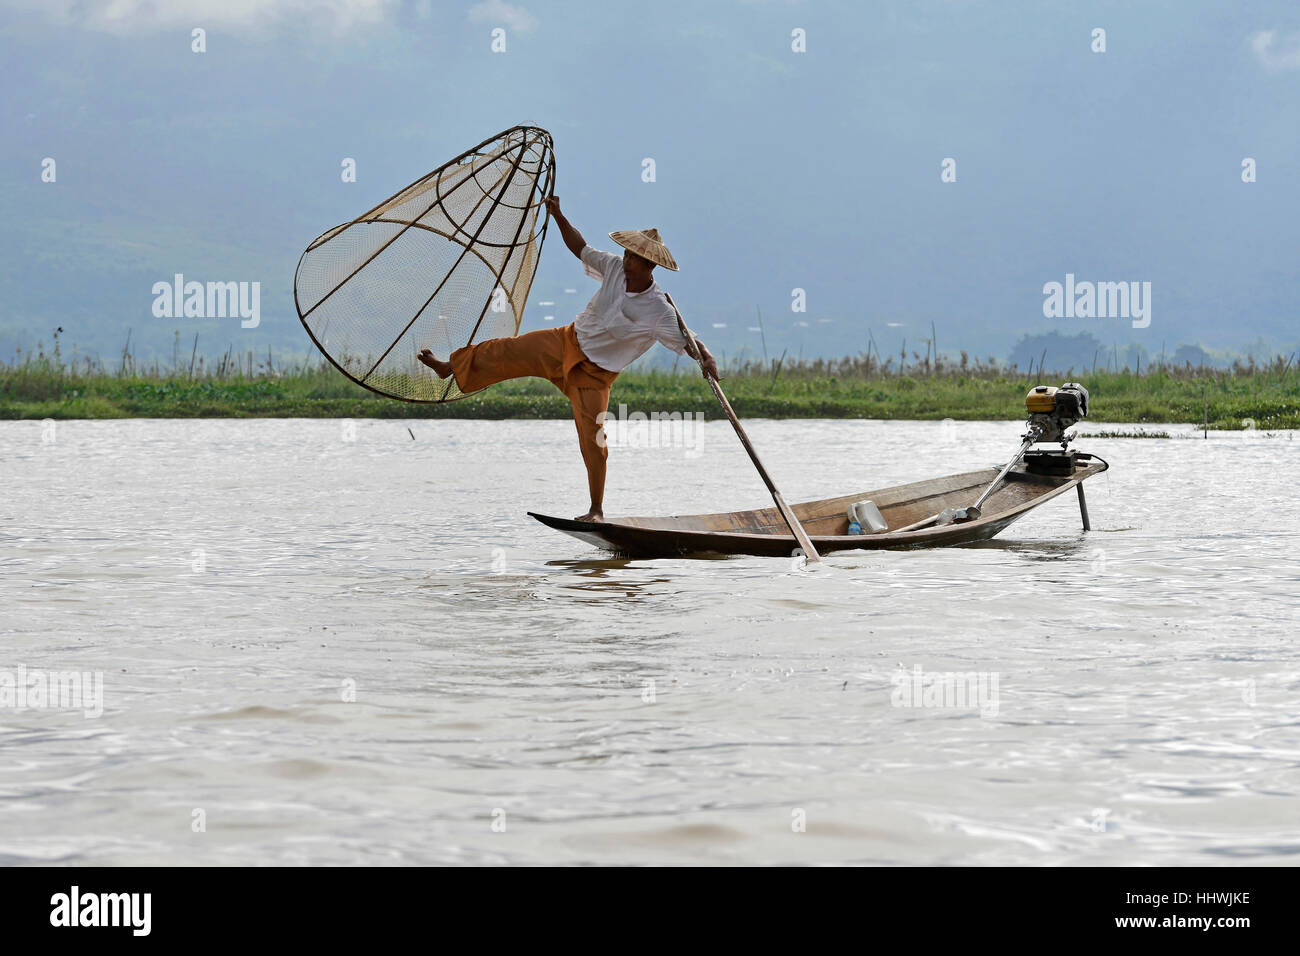 Intha fisherman, local fishing with traditional conical fishing net, Inle Lake, Myanmar Stock Photo